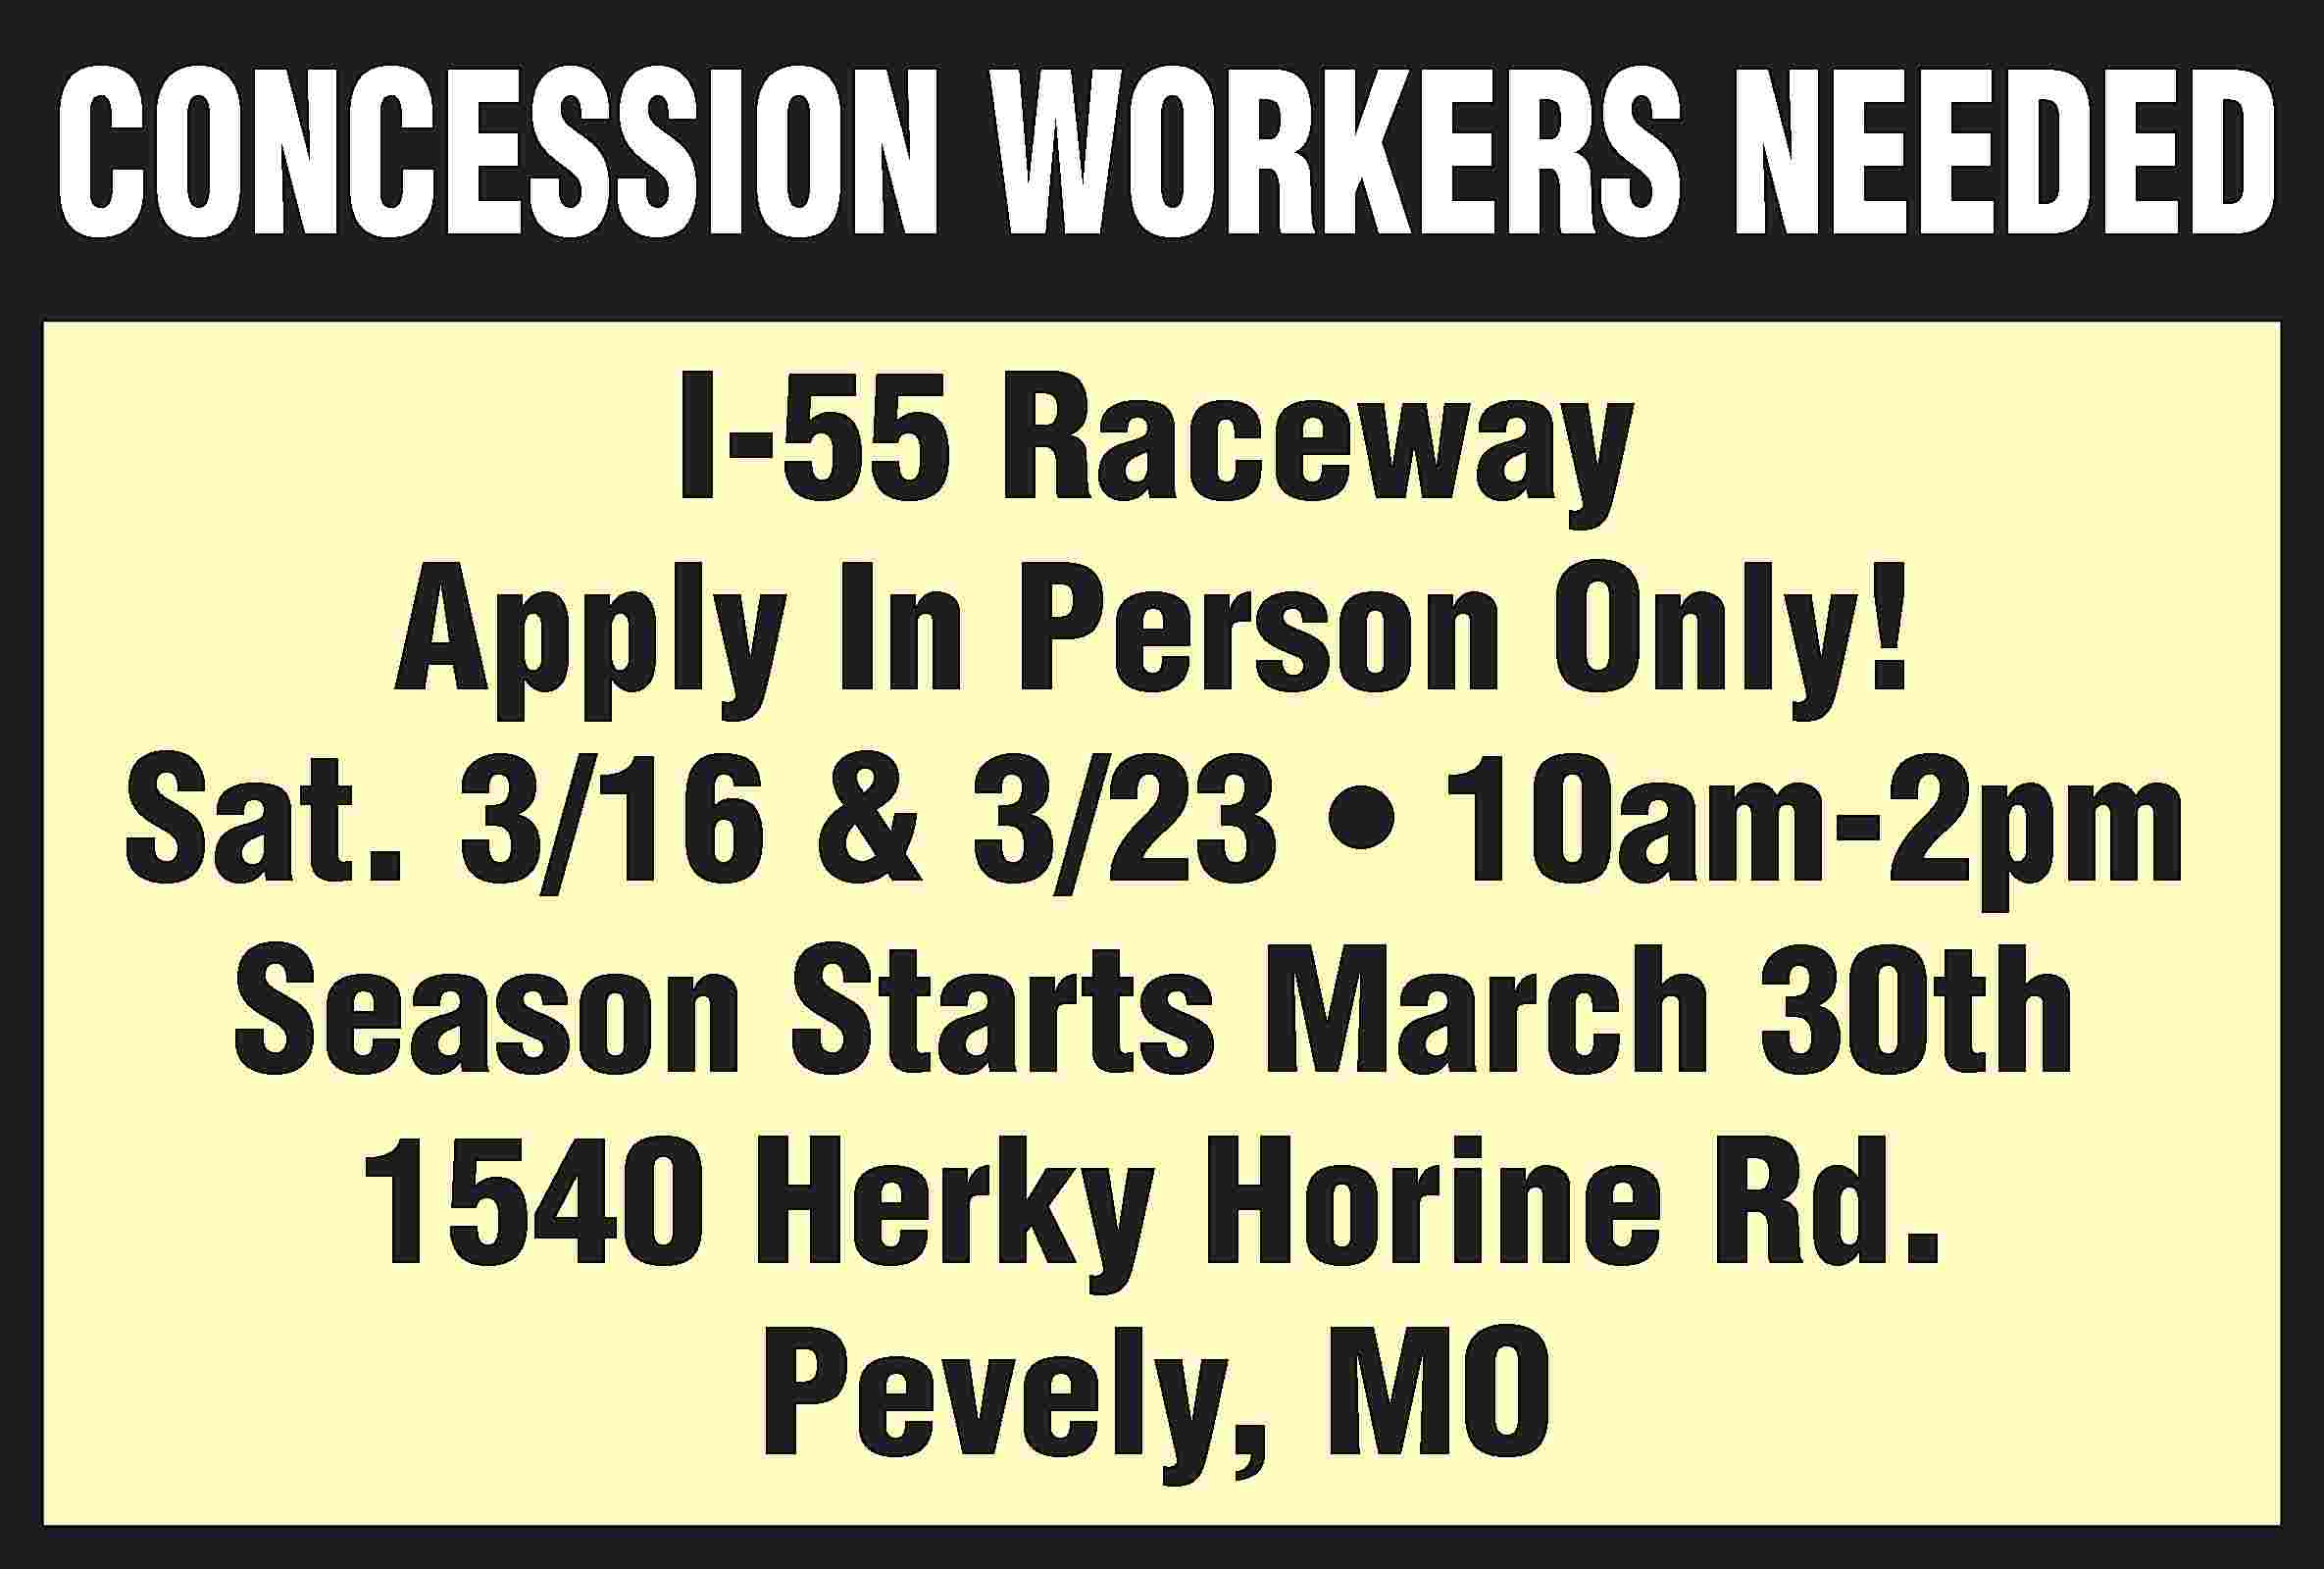 CONCESSION WORKERS NEEDED I-55 Raceway  CONCESSION WORKERS NEEDED I-55 Raceway Apply In Person Only! Sat. 3/16 & 3/23 • 10am-2pm Season Starts March 30th 1540 Herky Horine Rd. Pevely, MO